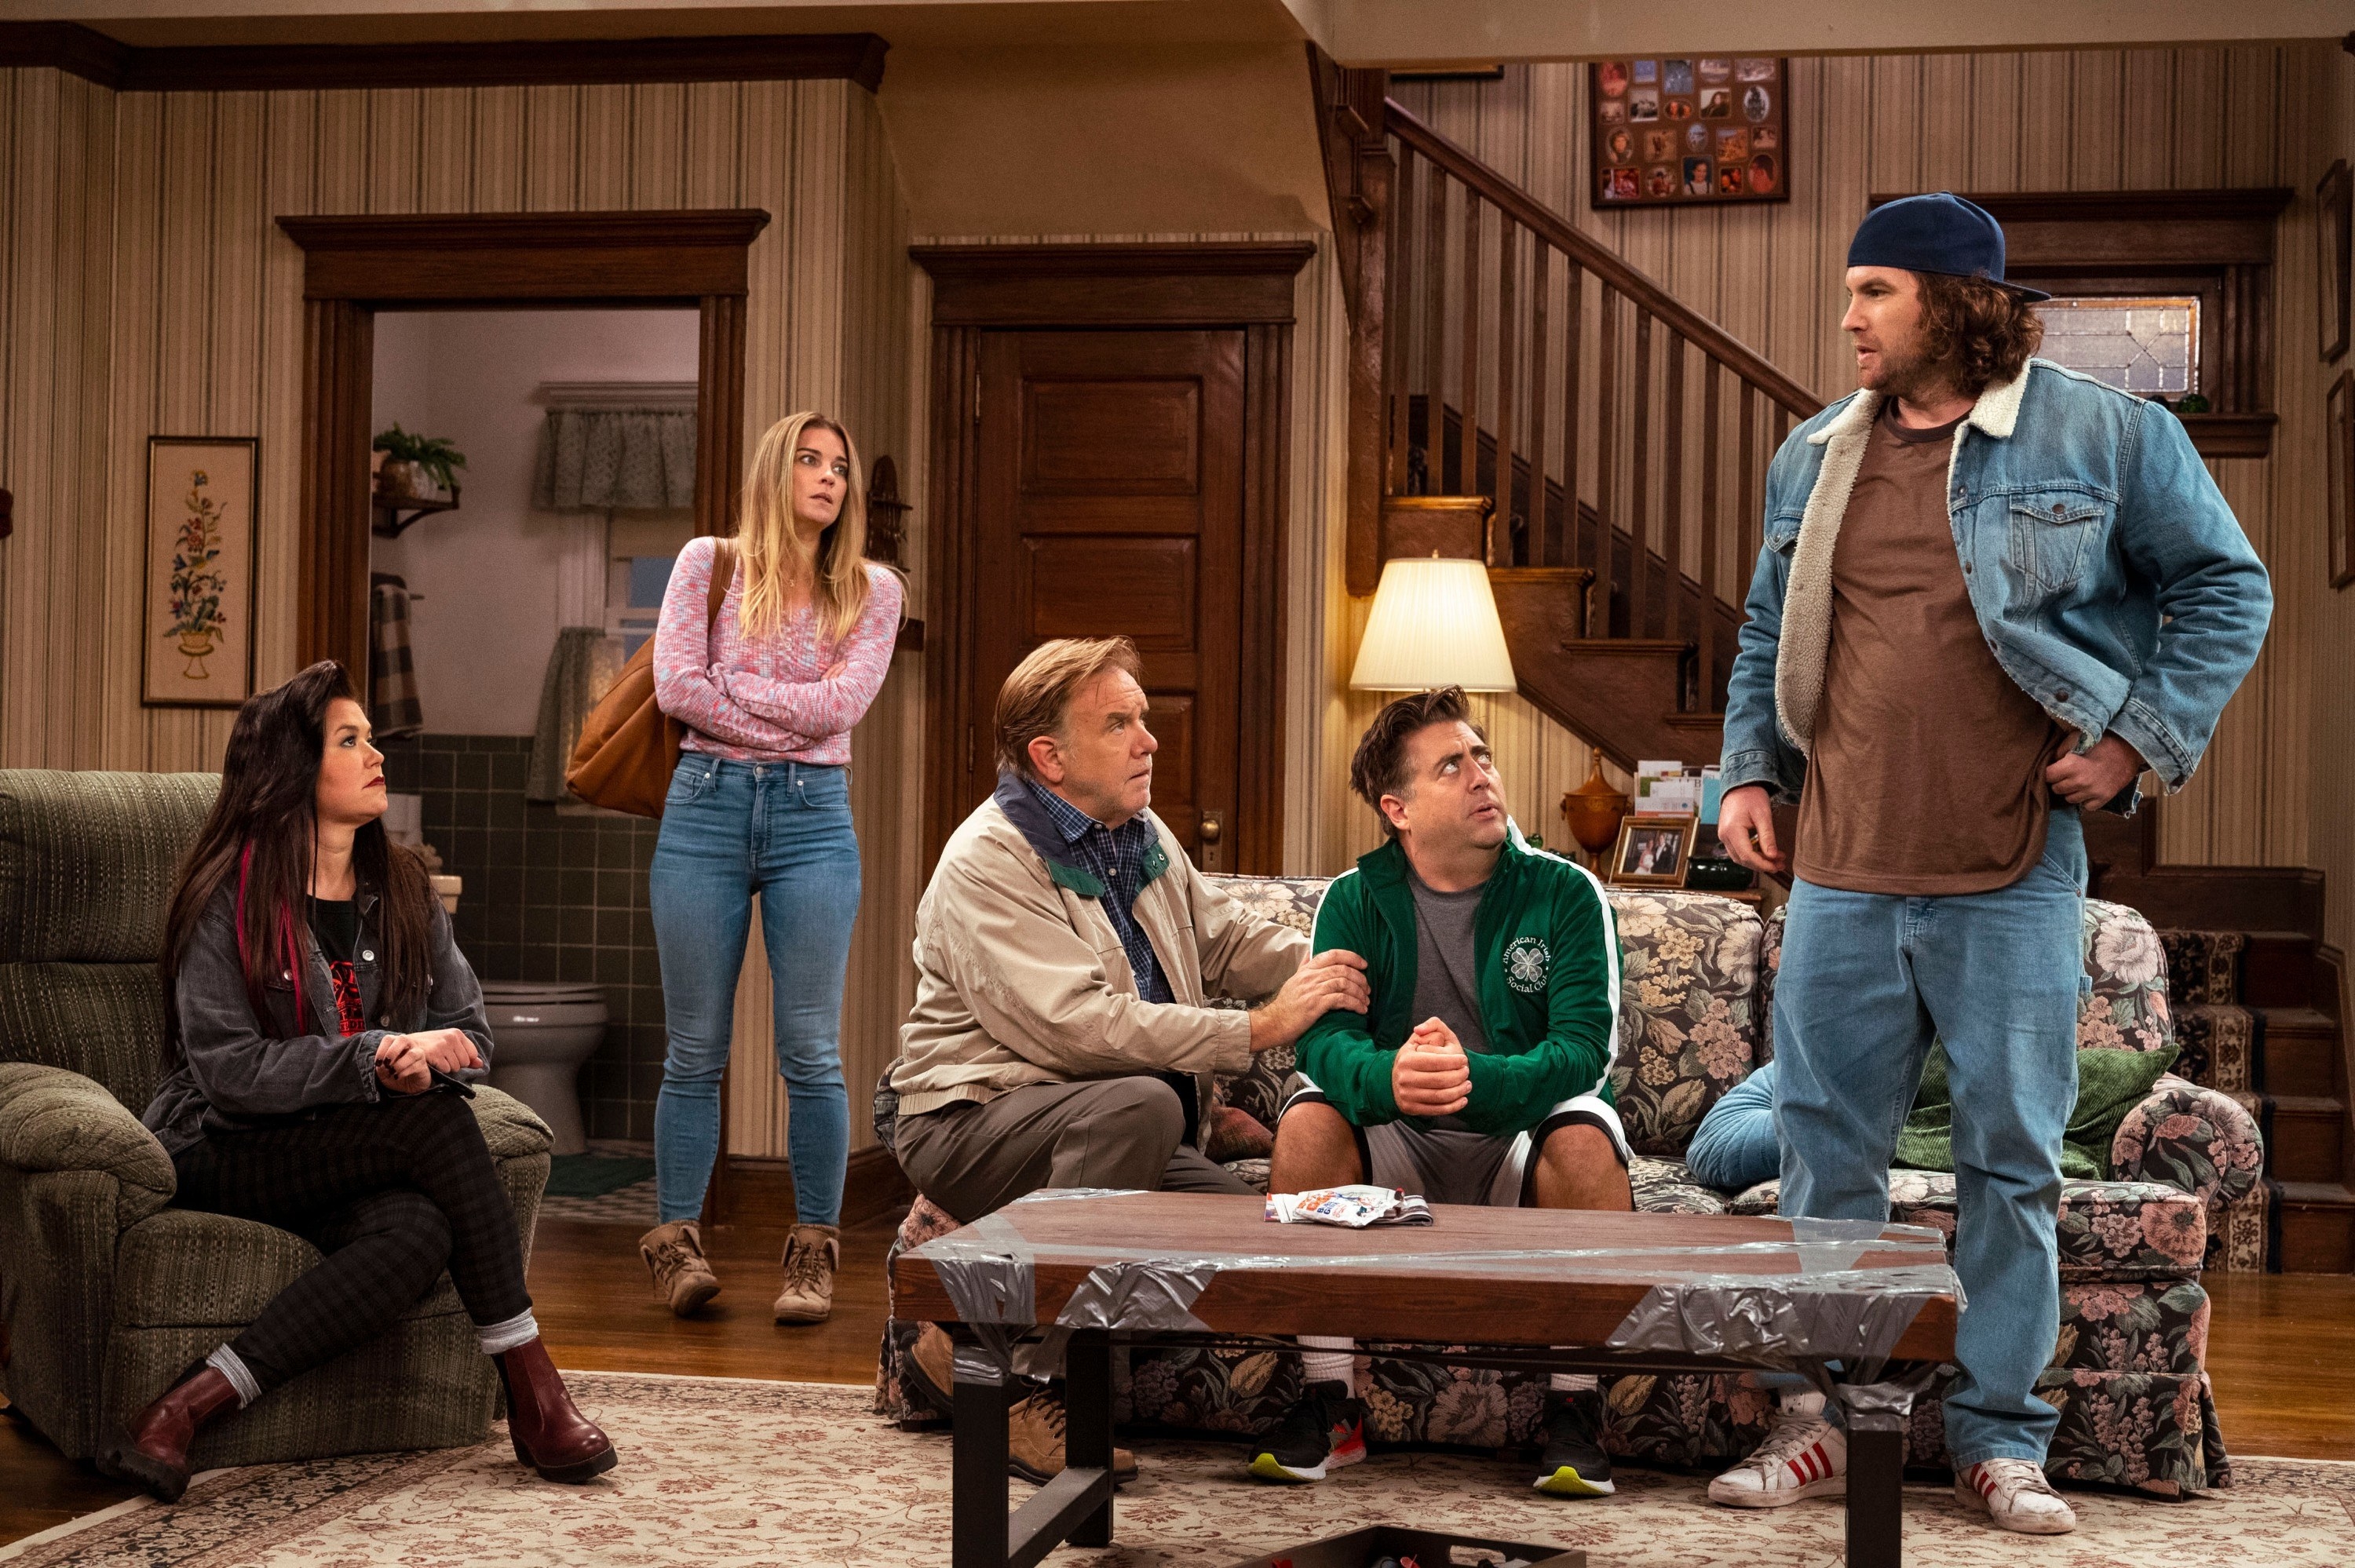 The cast in the sitcom living room set